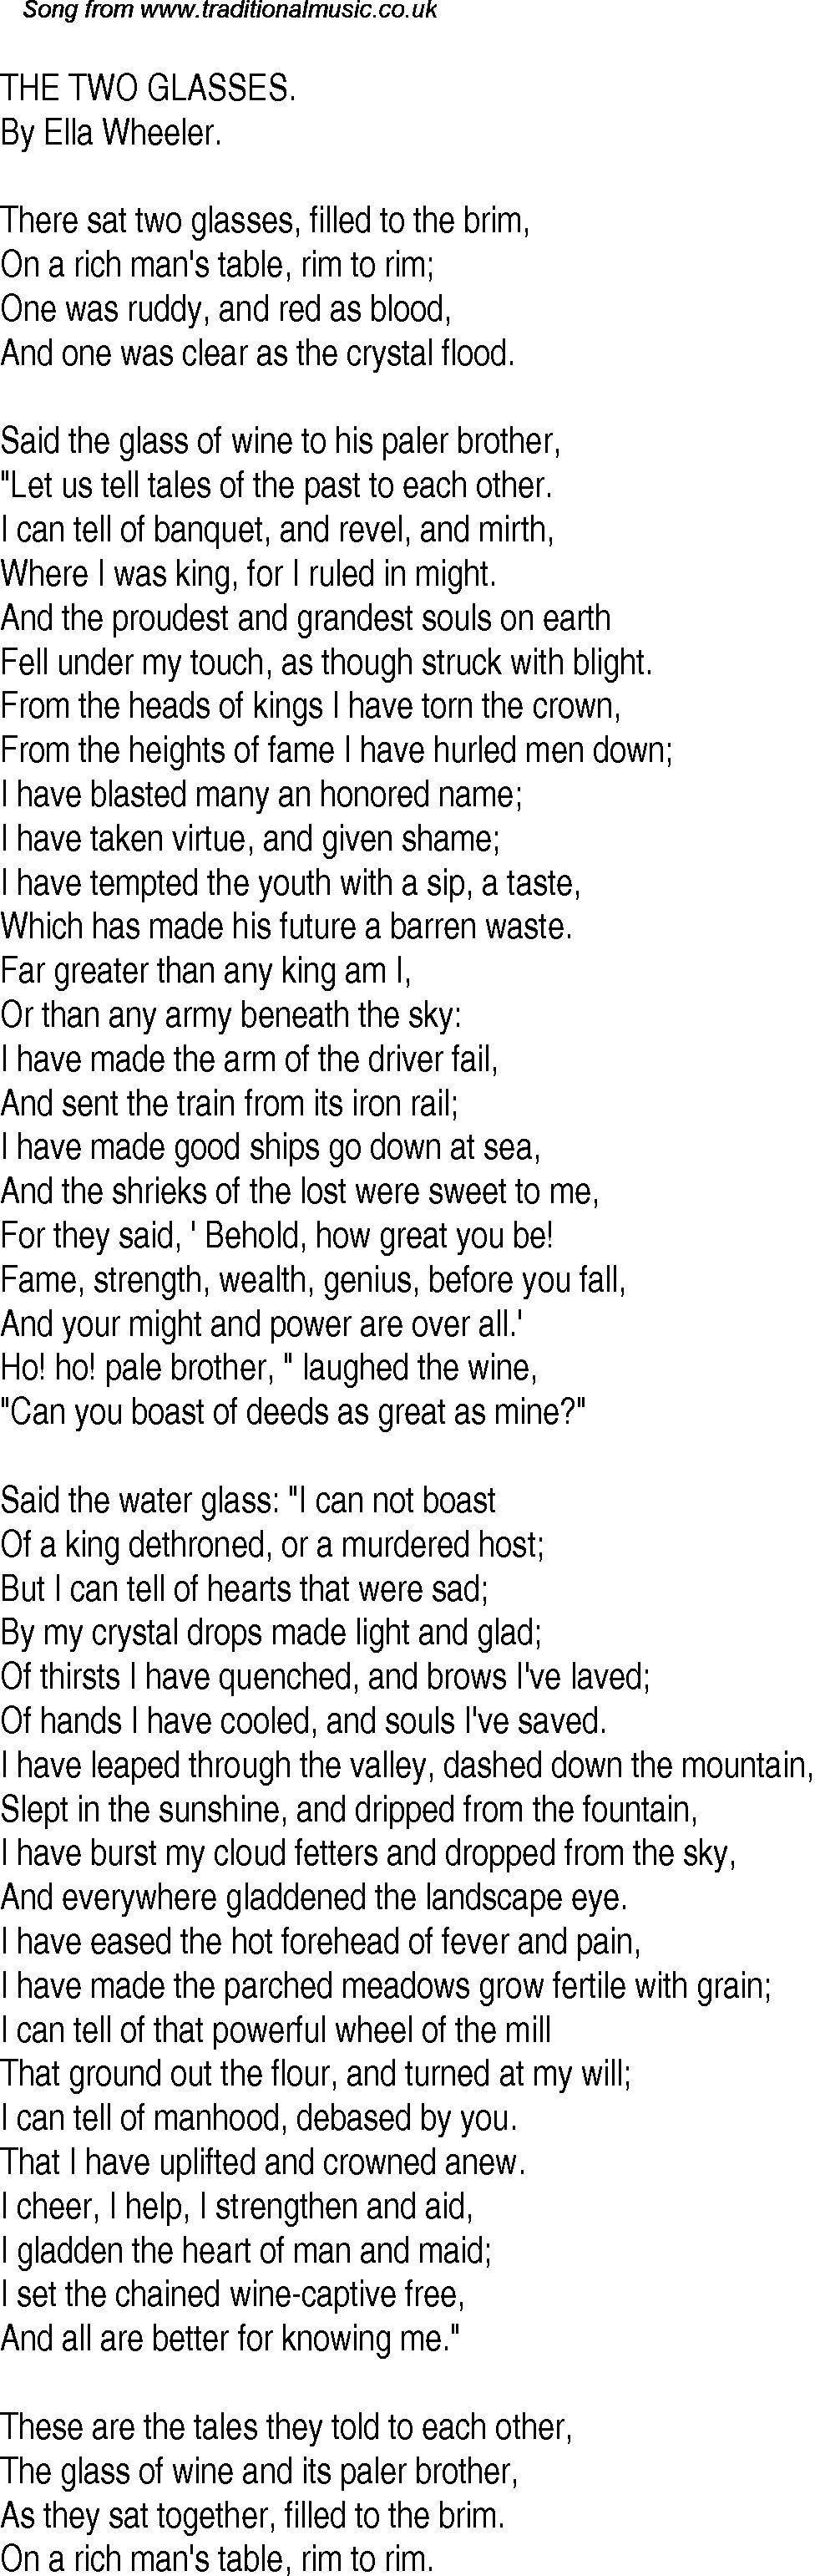 Old Time Song Lyrics for 25 The Two Glasses